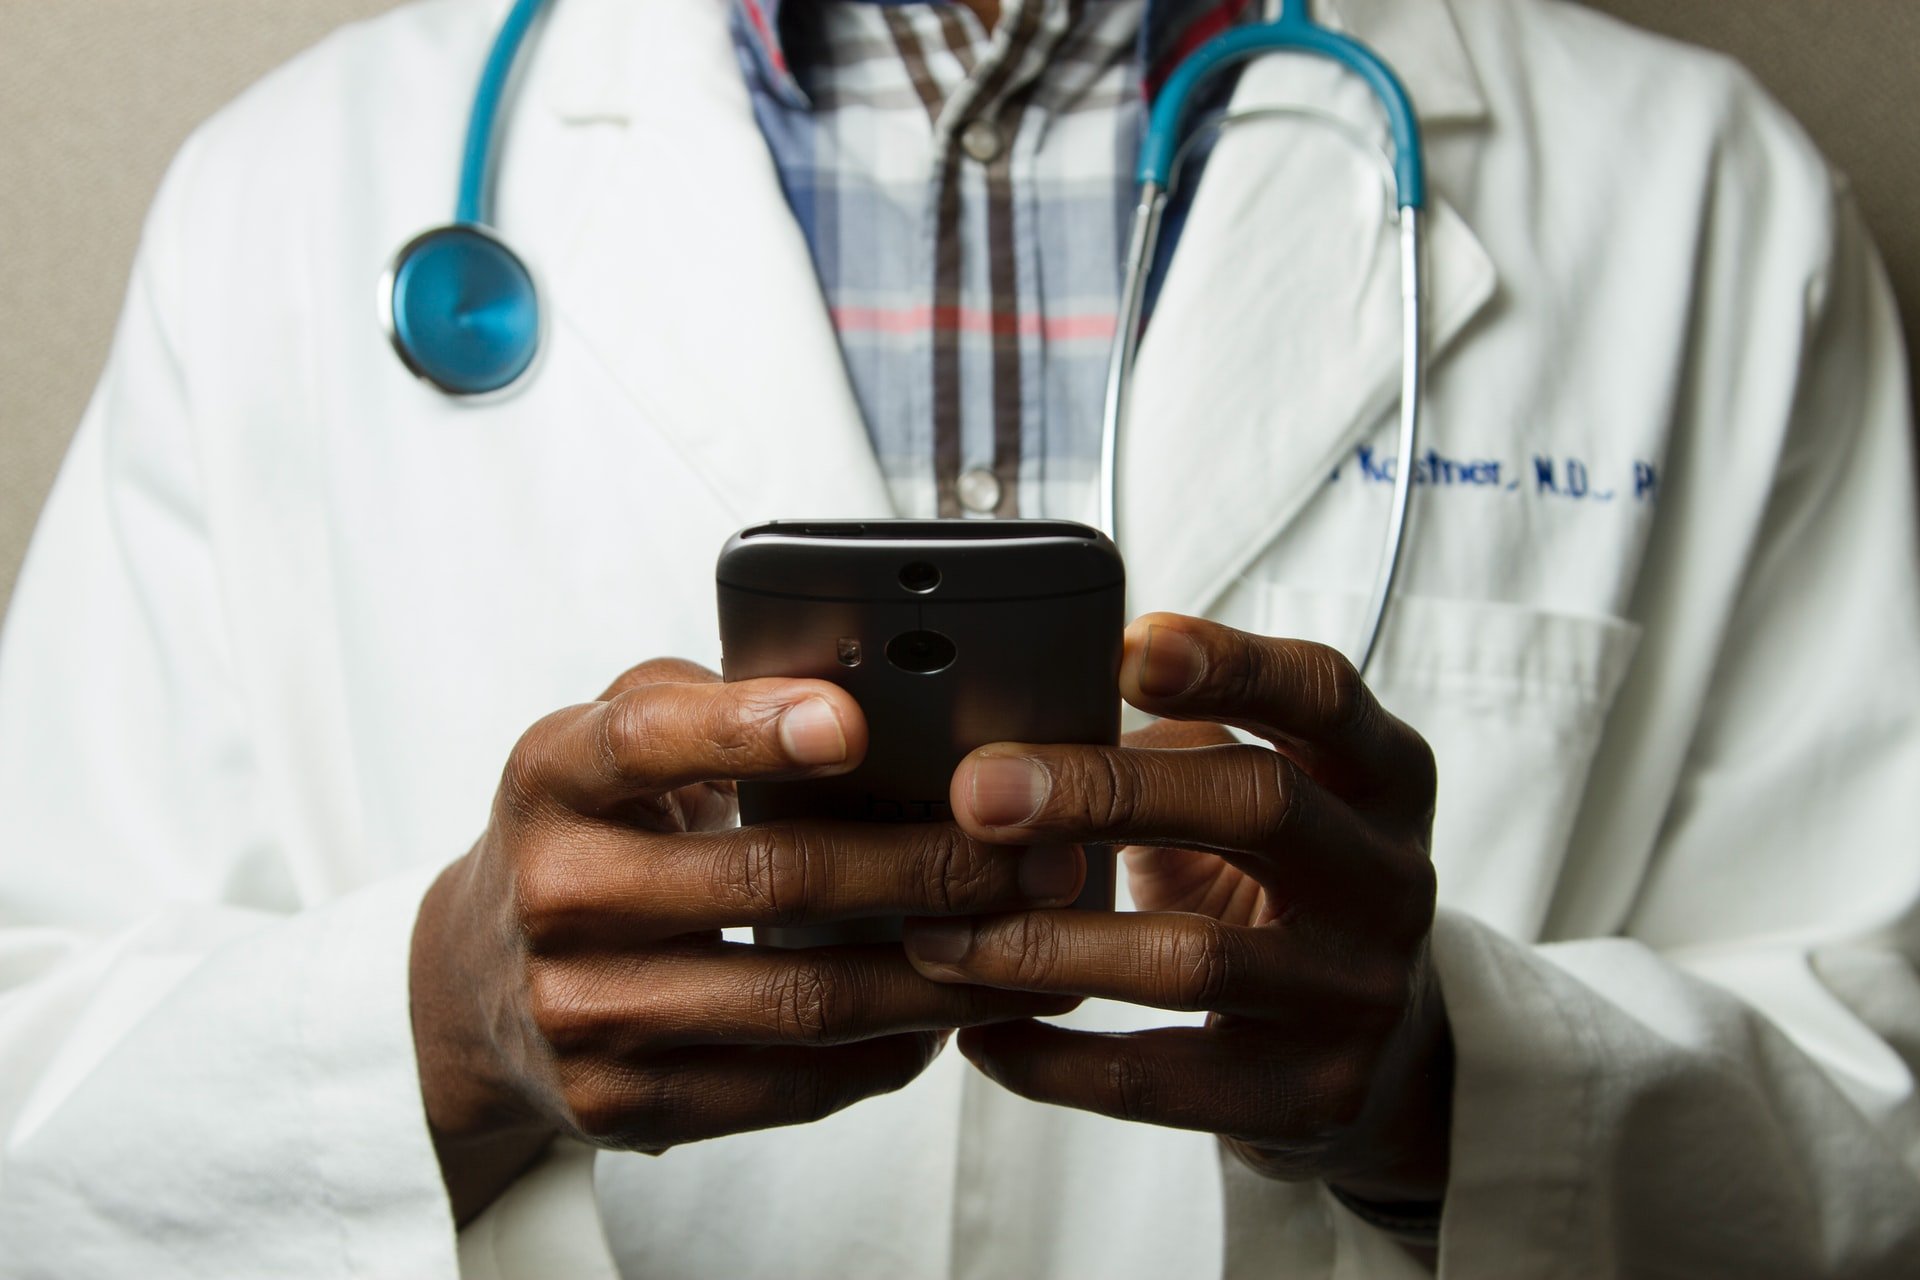 Doctor using phone with stethoscope around neck. Photo by National Cancer Institute on Unsplash